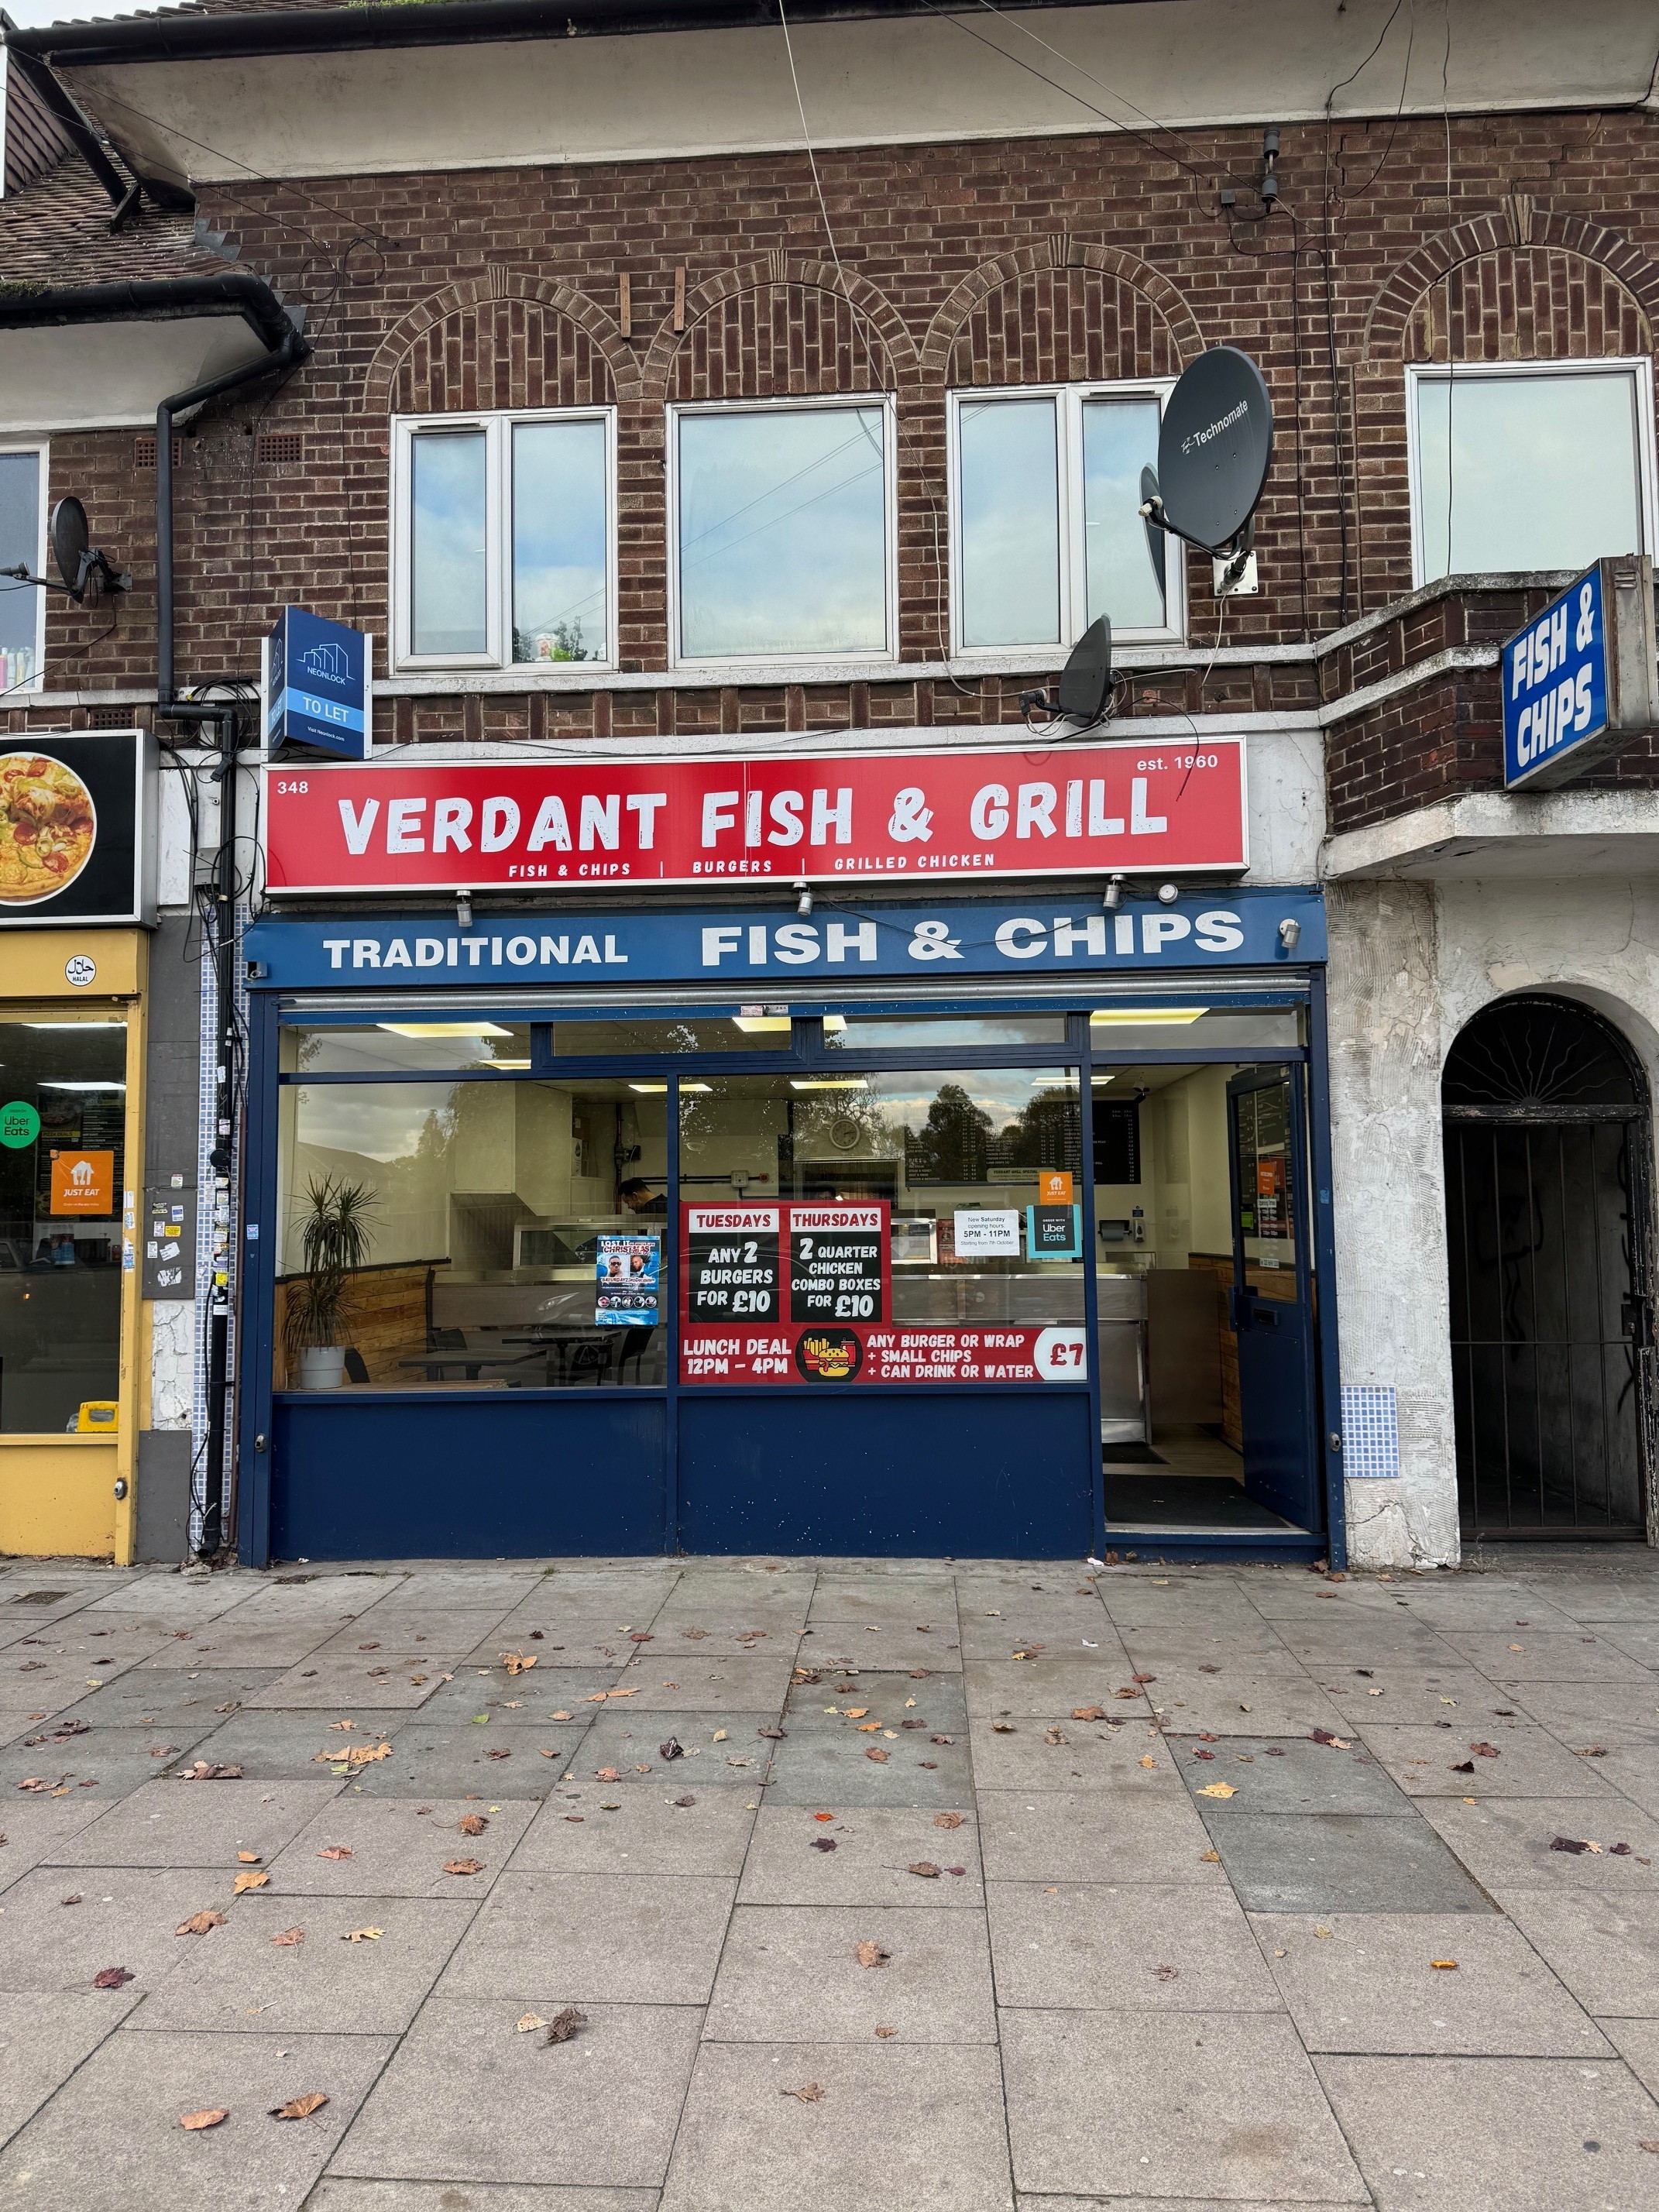 LEASE FOR SALE, Verdant Fish & Grill, Catford, South East London. Ref.1772